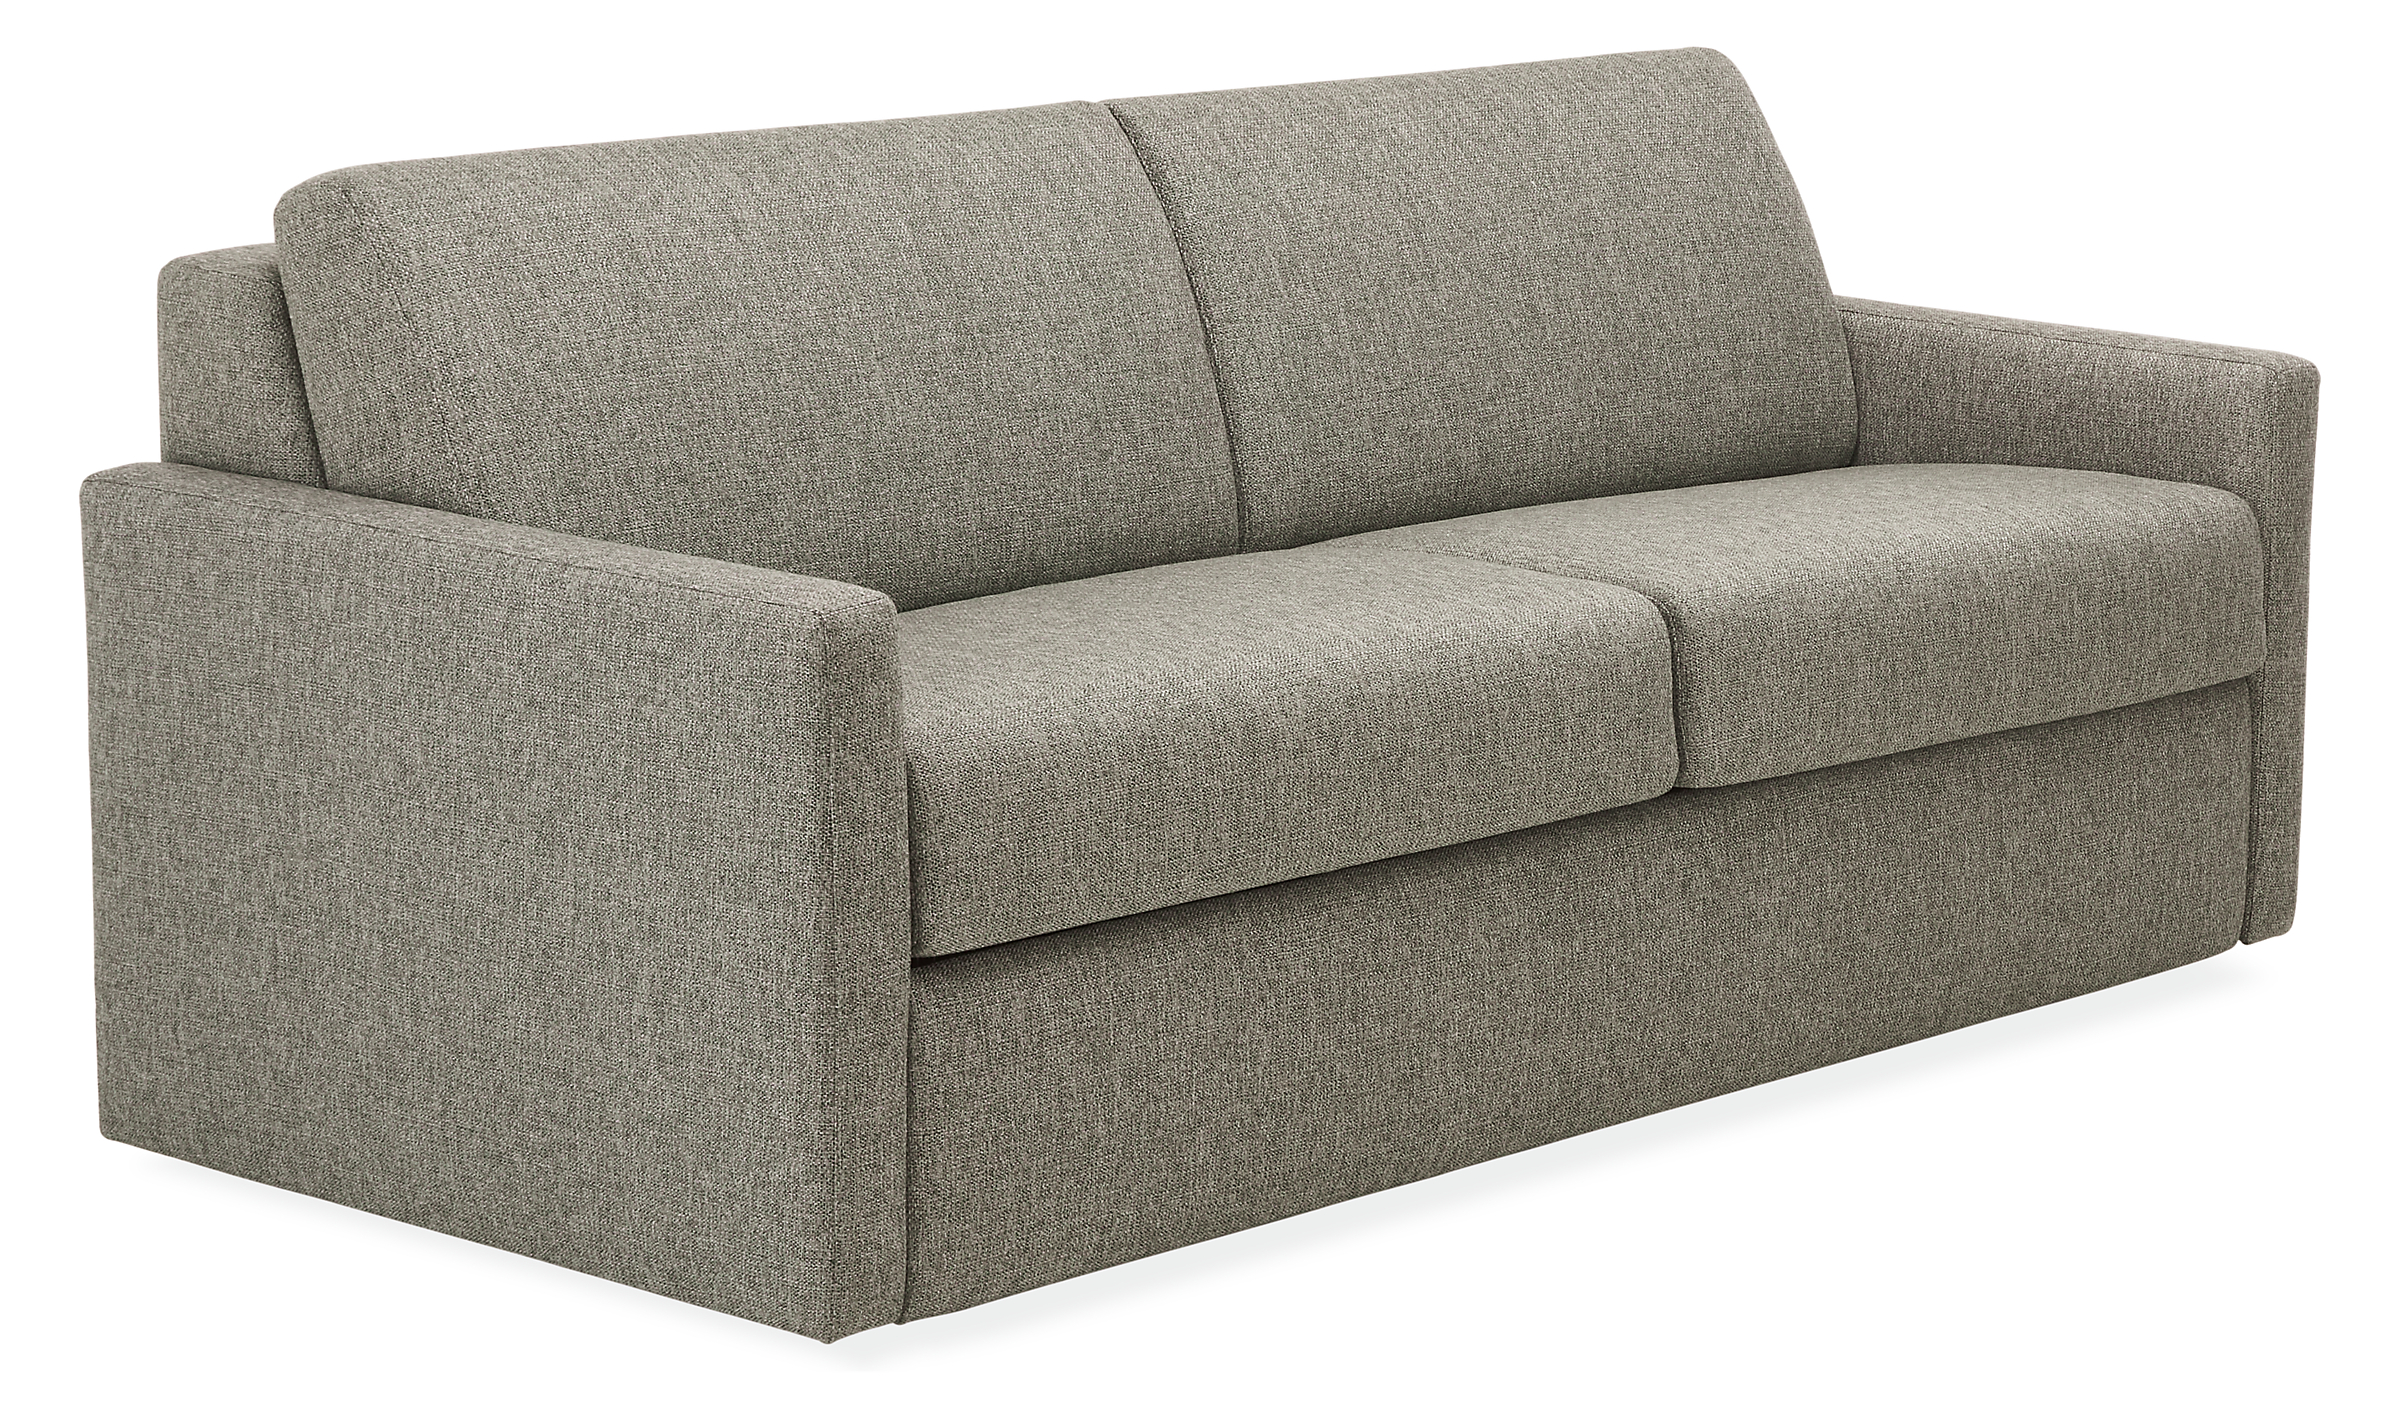 Angled view of Franklin 81-inch foldout sleeper sofa in Tepic Grey fabric.